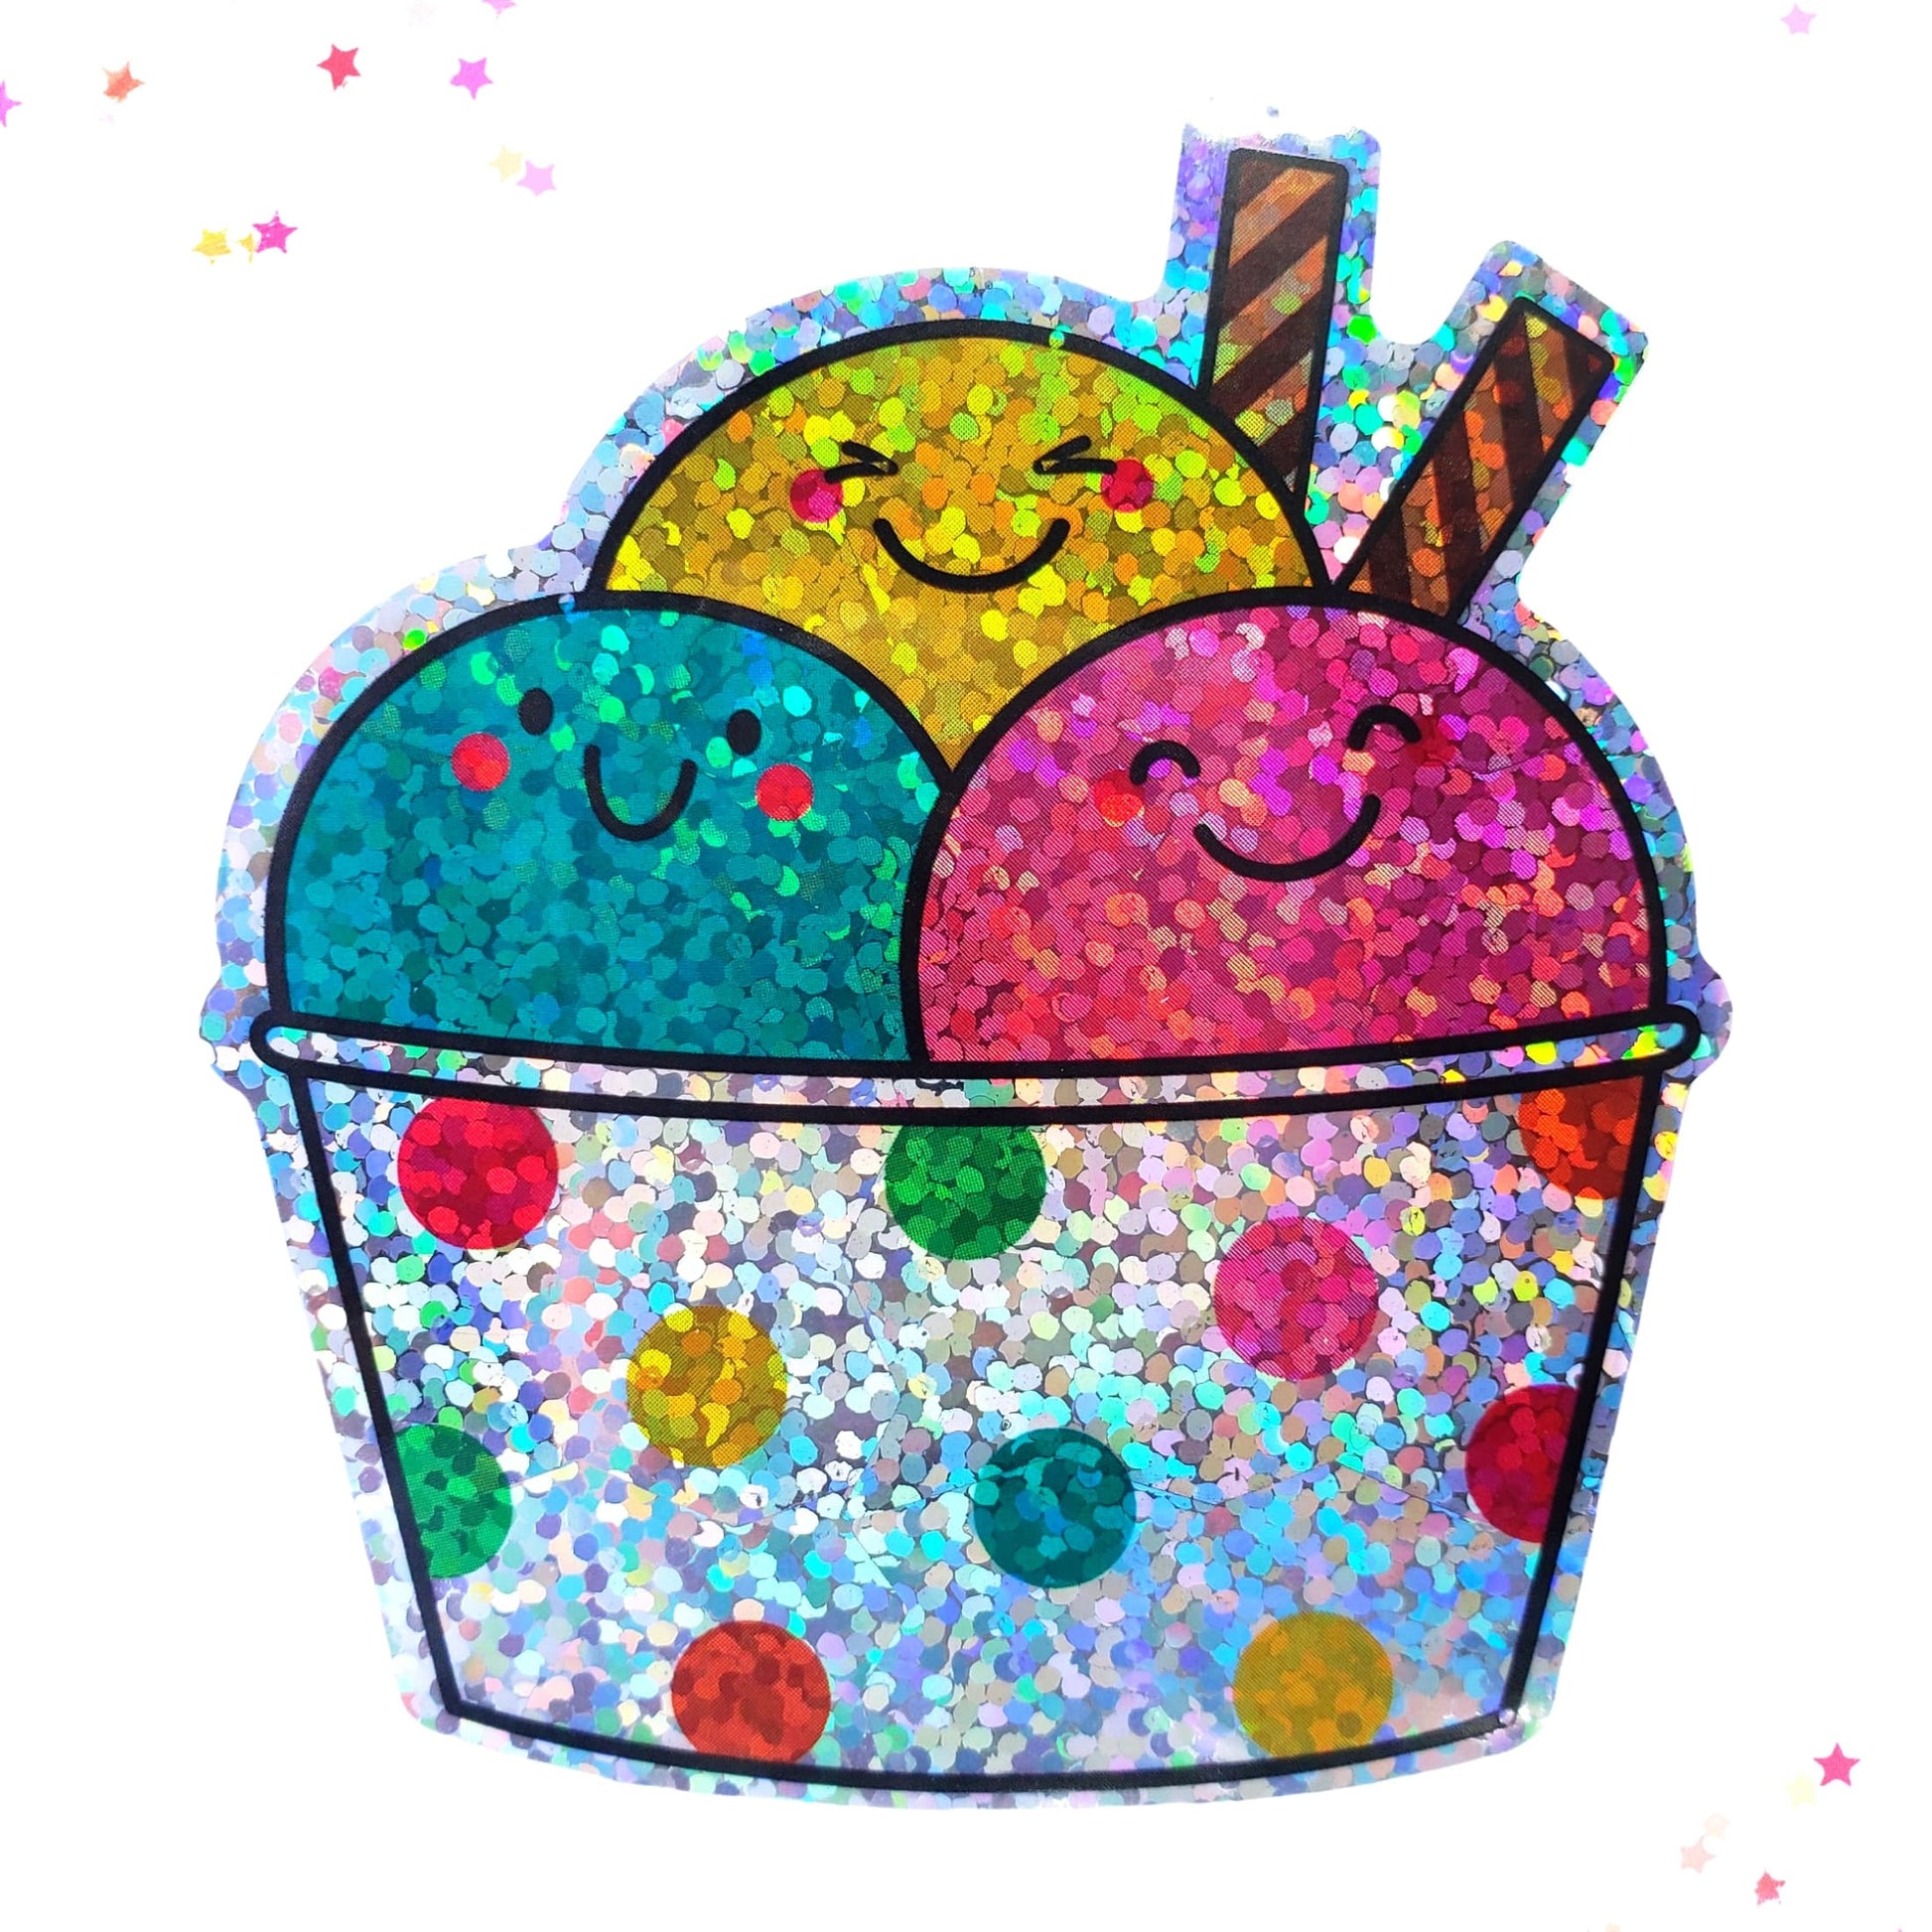 Premium Sticker - Sparkly Holographic Glitter Three Scoop Ice Cream Sundae from Confetti Kitty, Only 2.00